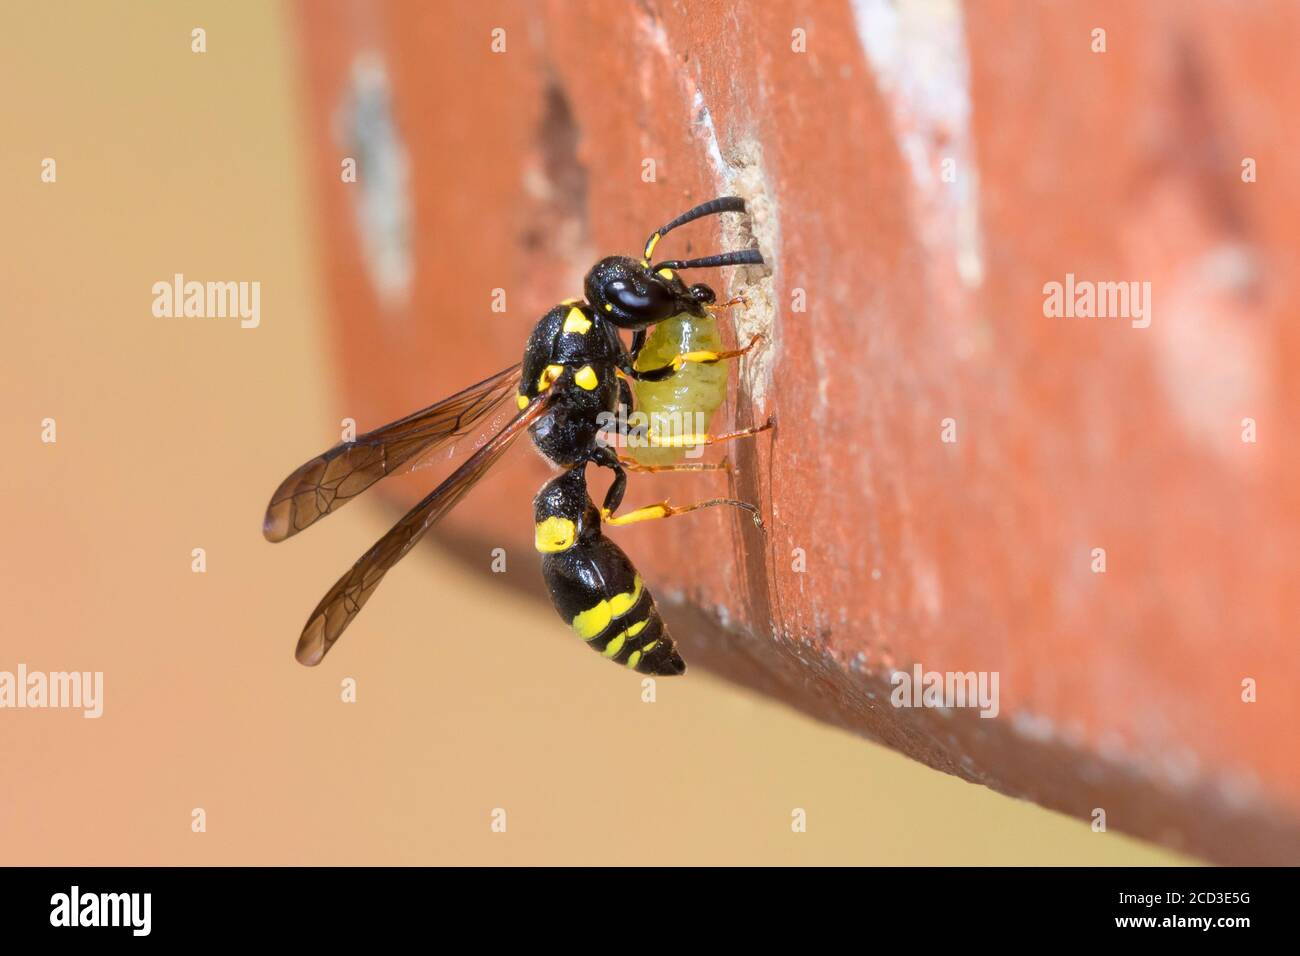 Mason wasp, potter wasp (Symmorphus crassicornis), female carrying caught beetle larva to the nesting hole in a brick of an insect hotel, Germany Stock Photo